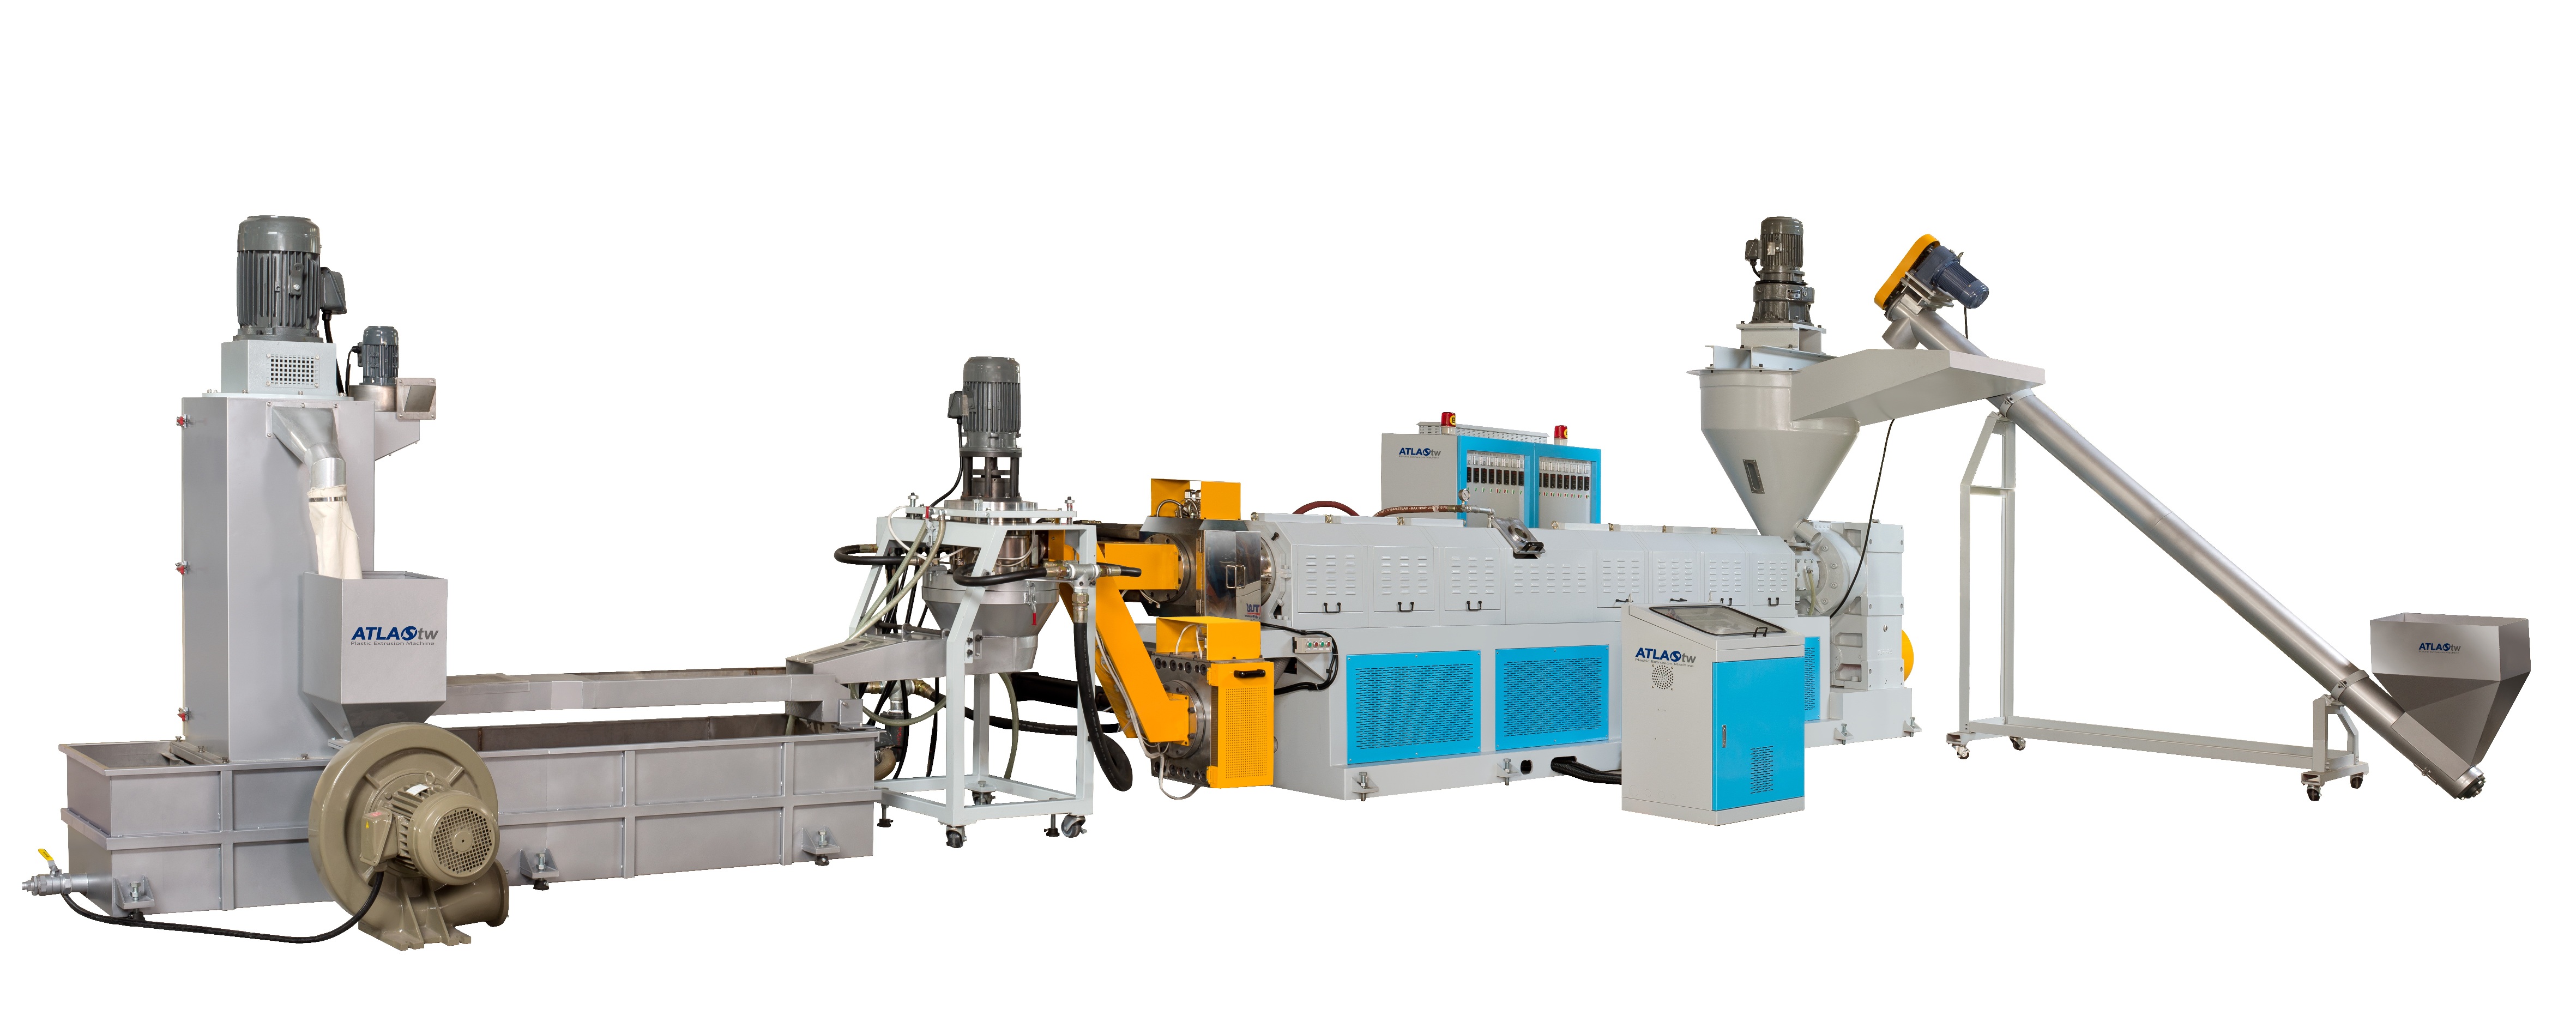 Hopper Feeding & Die Face Cutting Plastic Recycling Machine is designed and built mainly for recycling hard crushed plastics and injection materials.